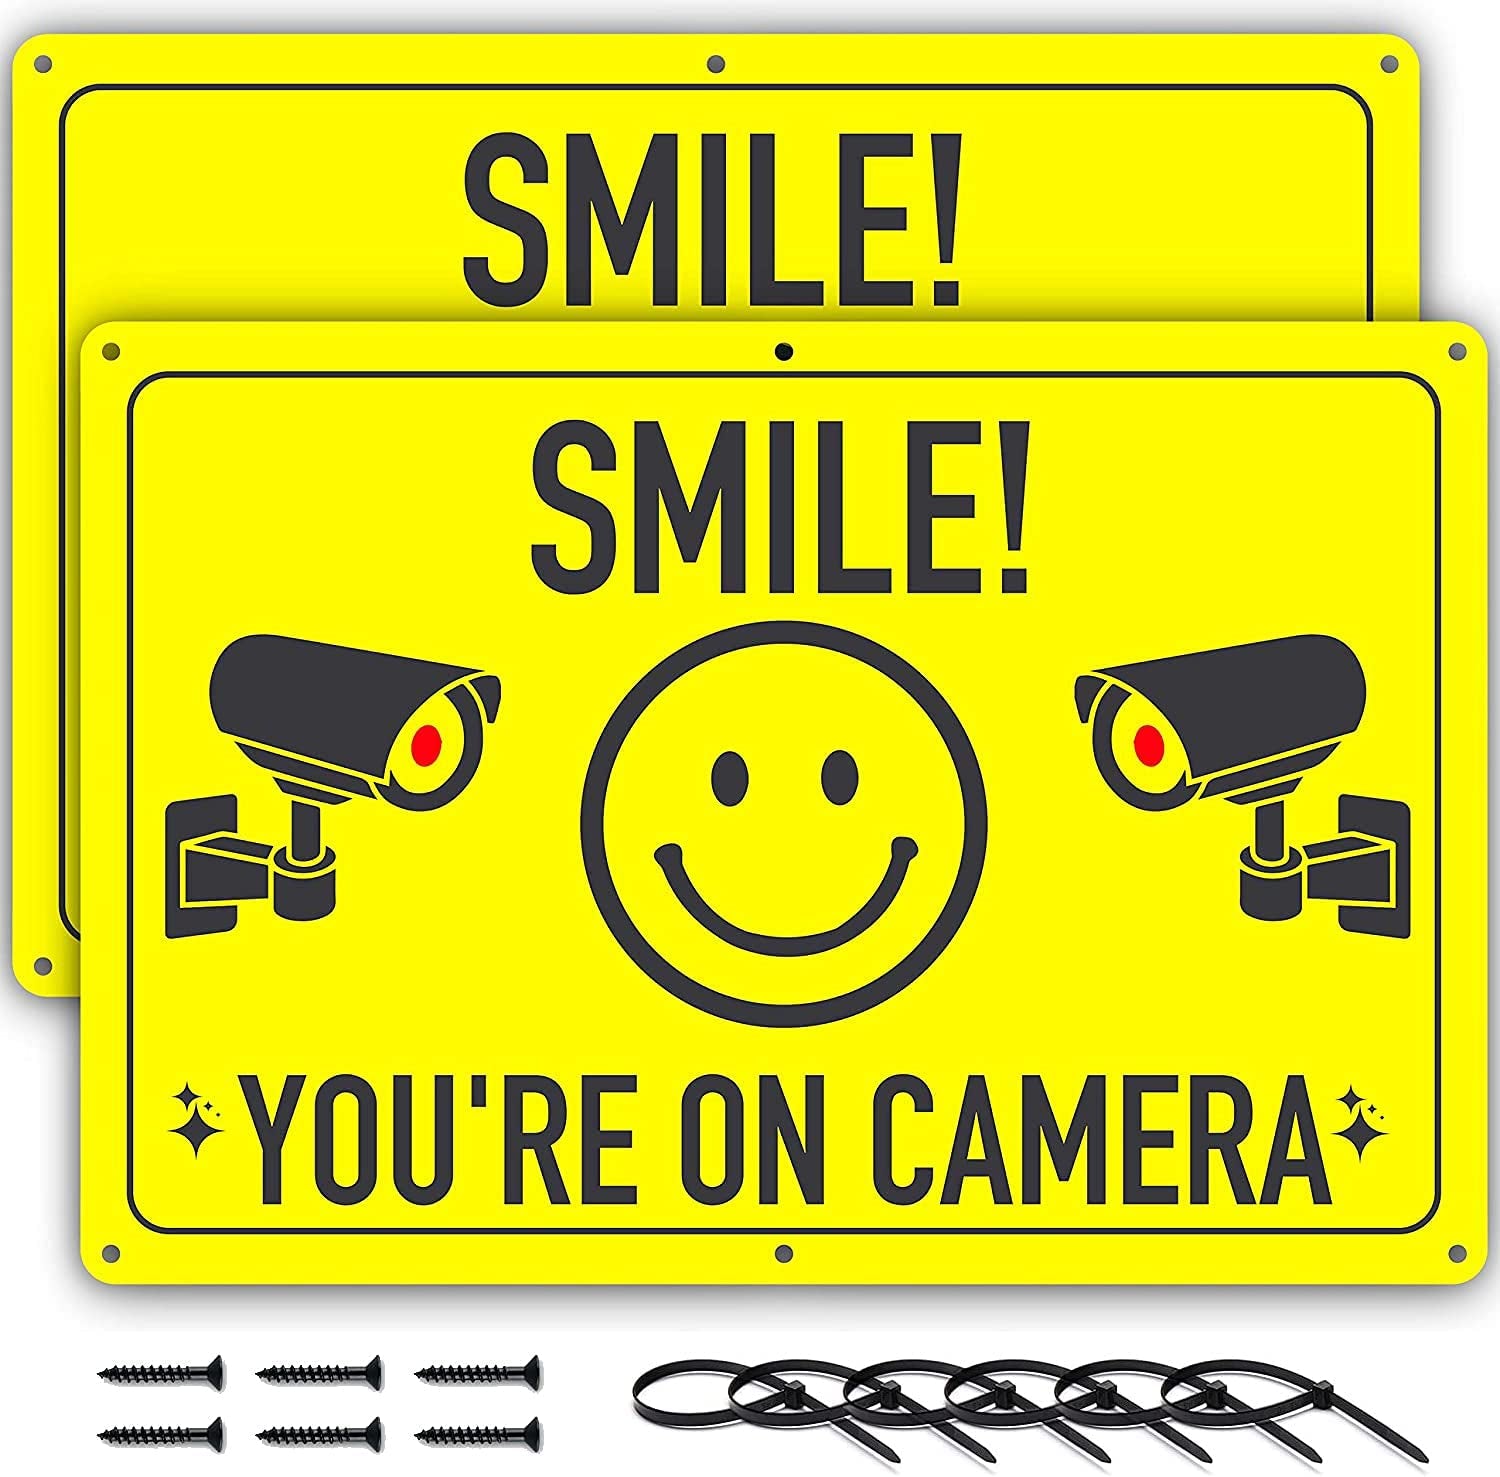 ASSURED SIGNS, Smile You'Re on Camera Sign - 11.75 X 8 Inch - Ideal Aluminum Video Surveillance Security Signs to Prevent Trespassing on Private Property - Perfect for House, Business, Yard or Private Driveway